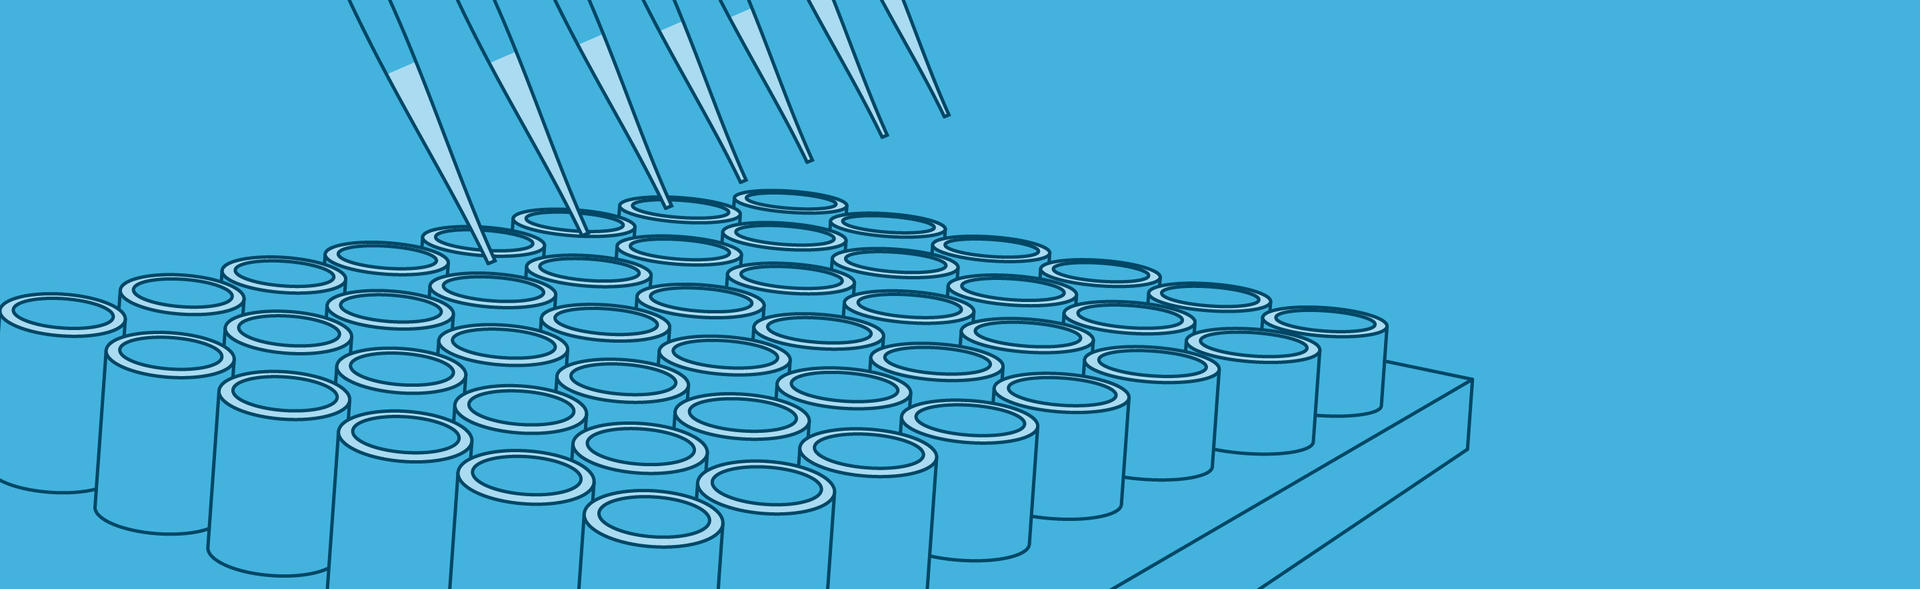 Illustrated multichannel pipette and test tubes.